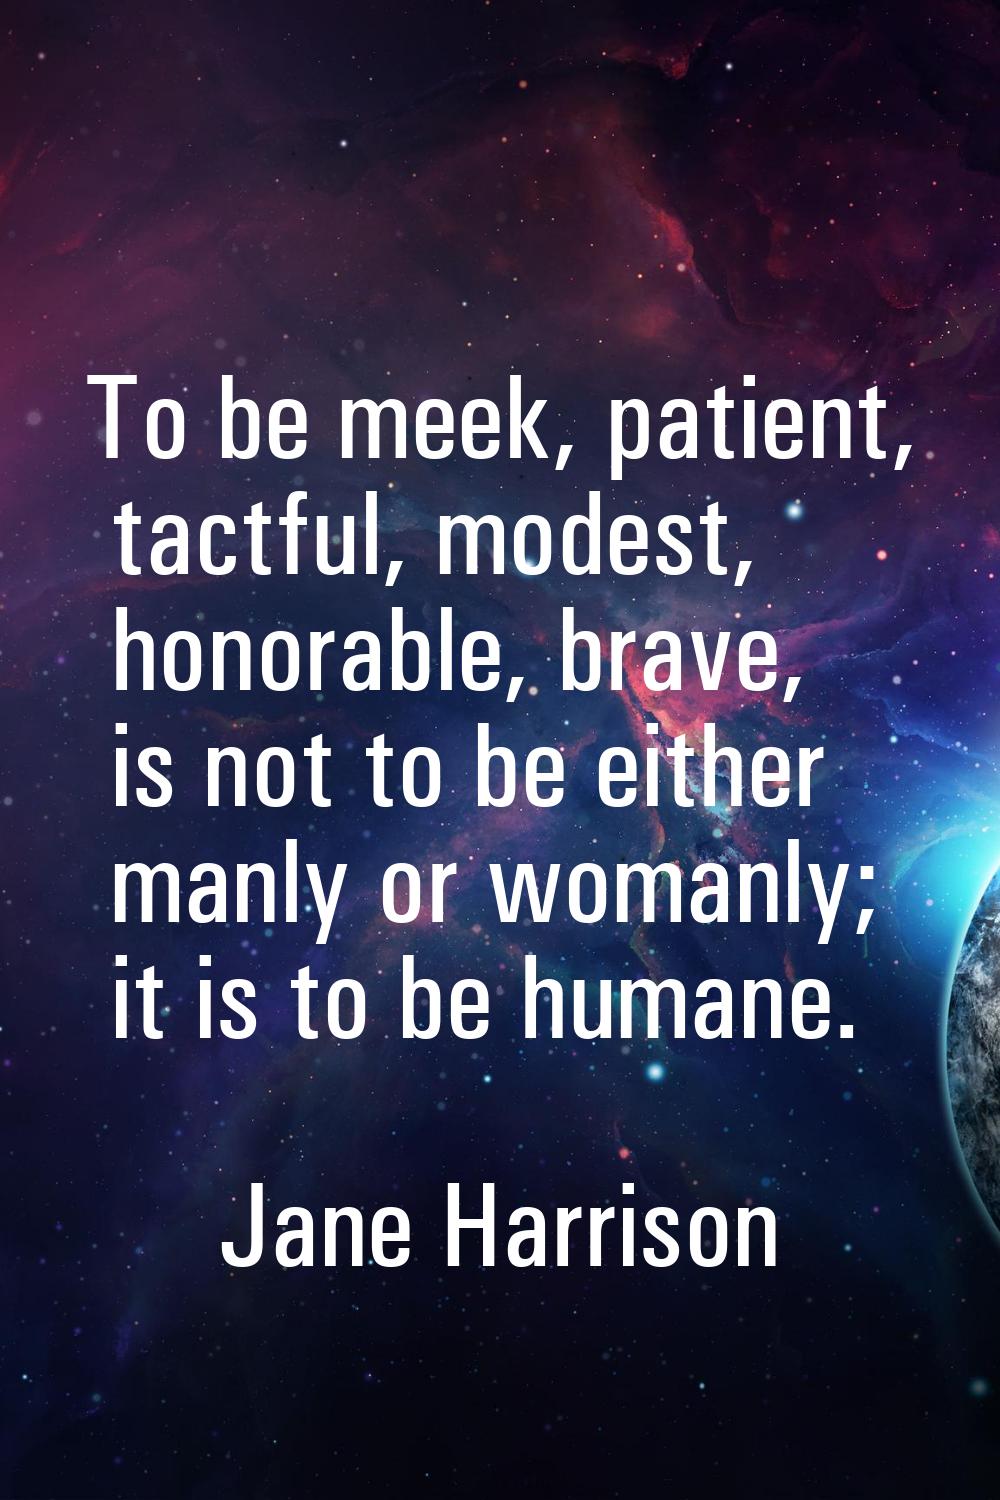 To be meek, patient, tactful, modest, honorable, brave, is not to be either manly or womanly; it is